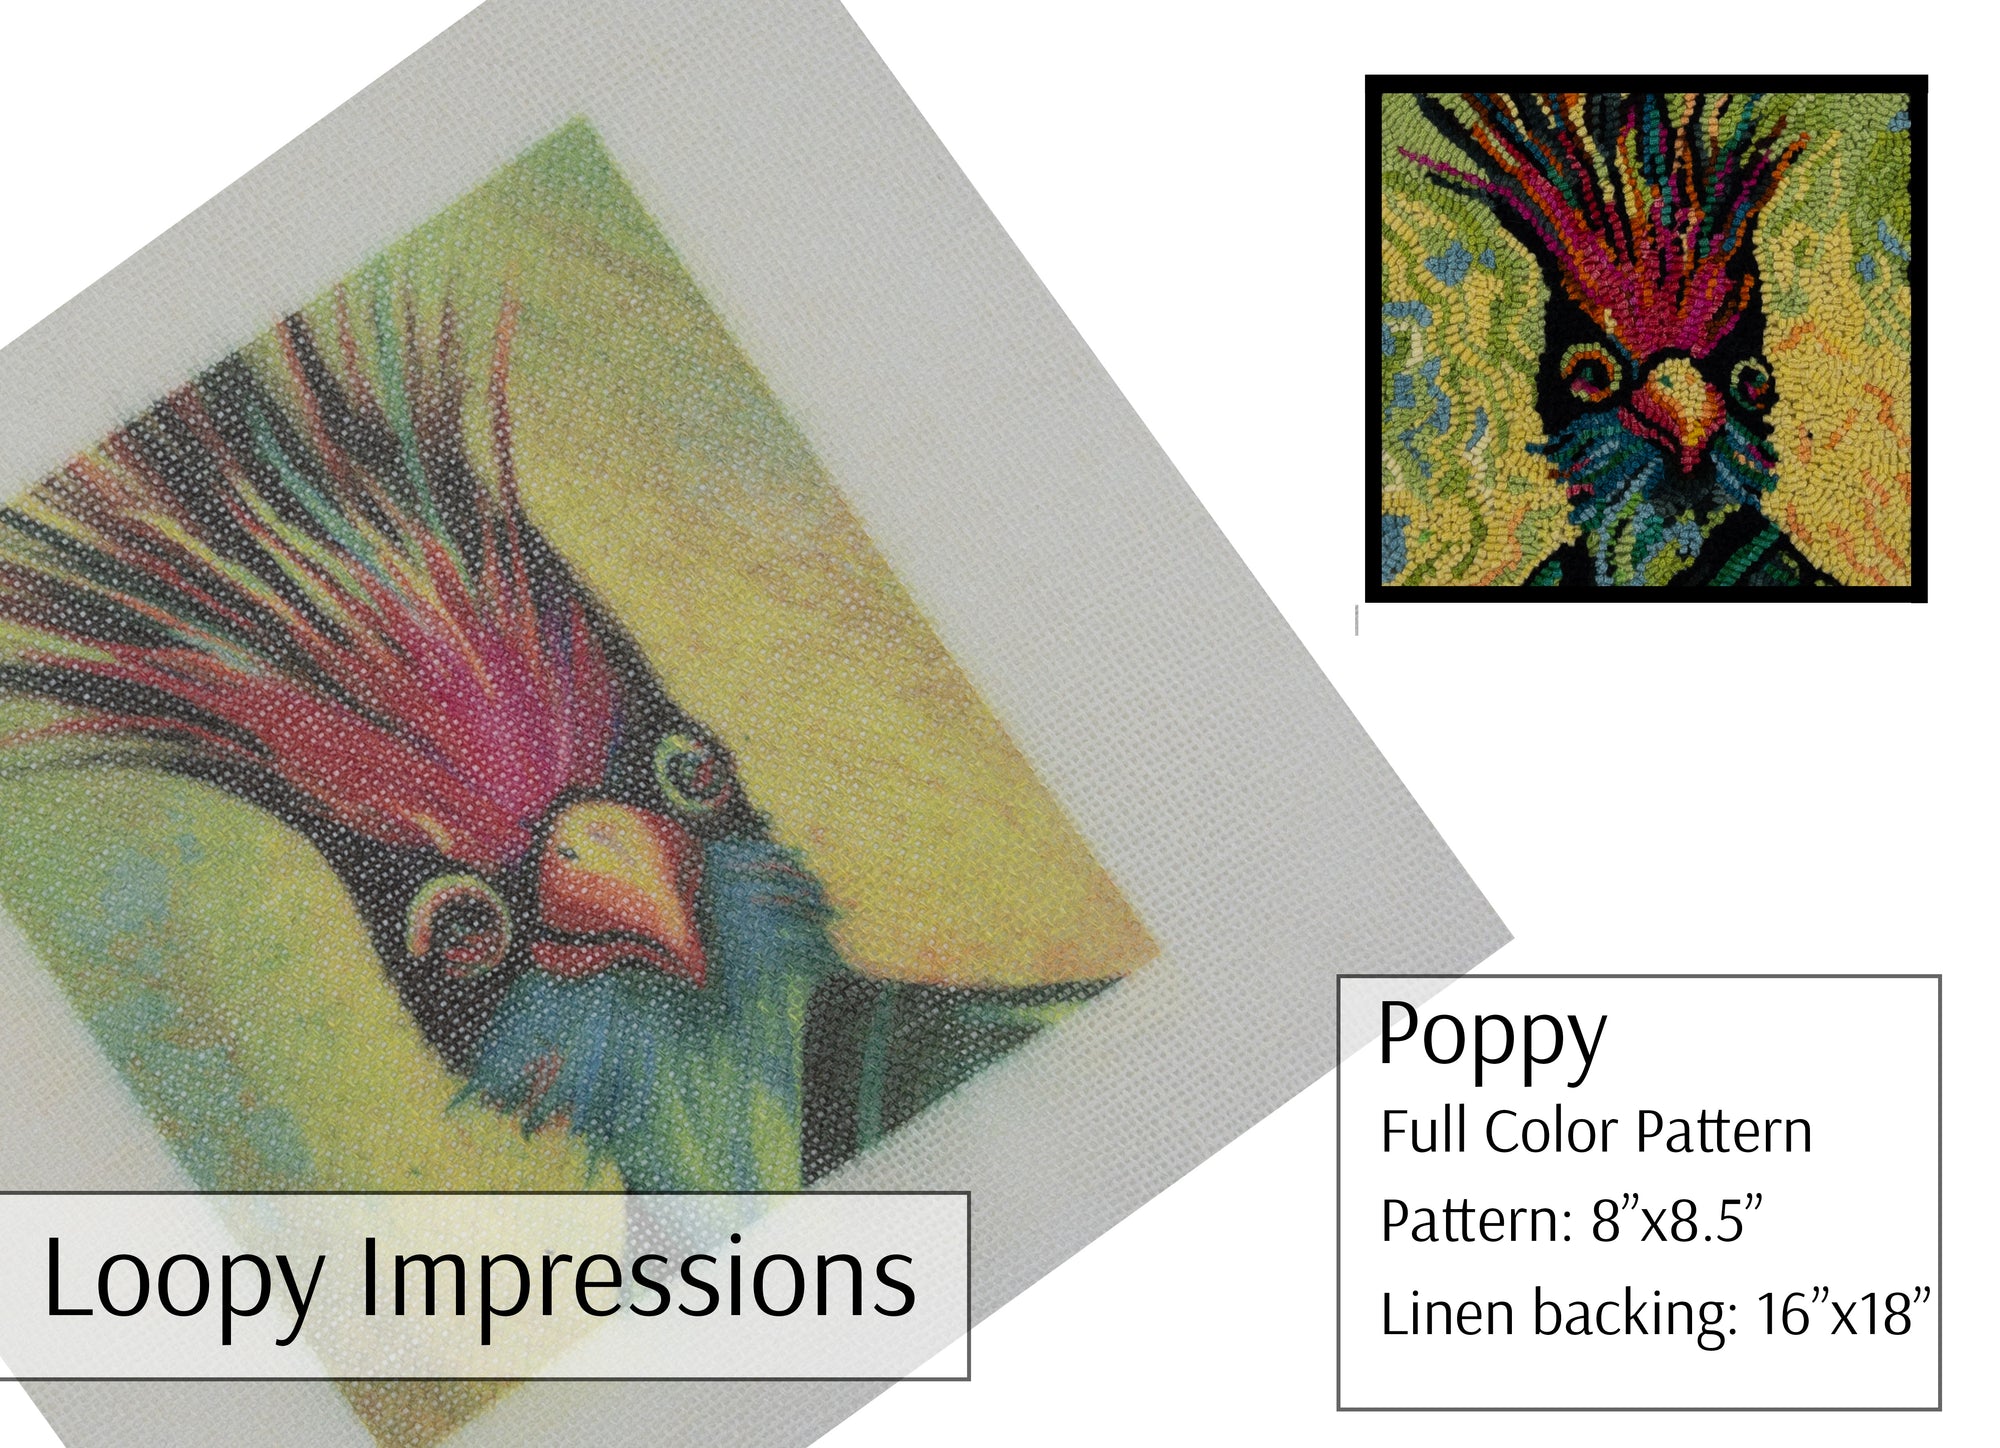 Loopy Impressions Full Color Pattern - Poppy